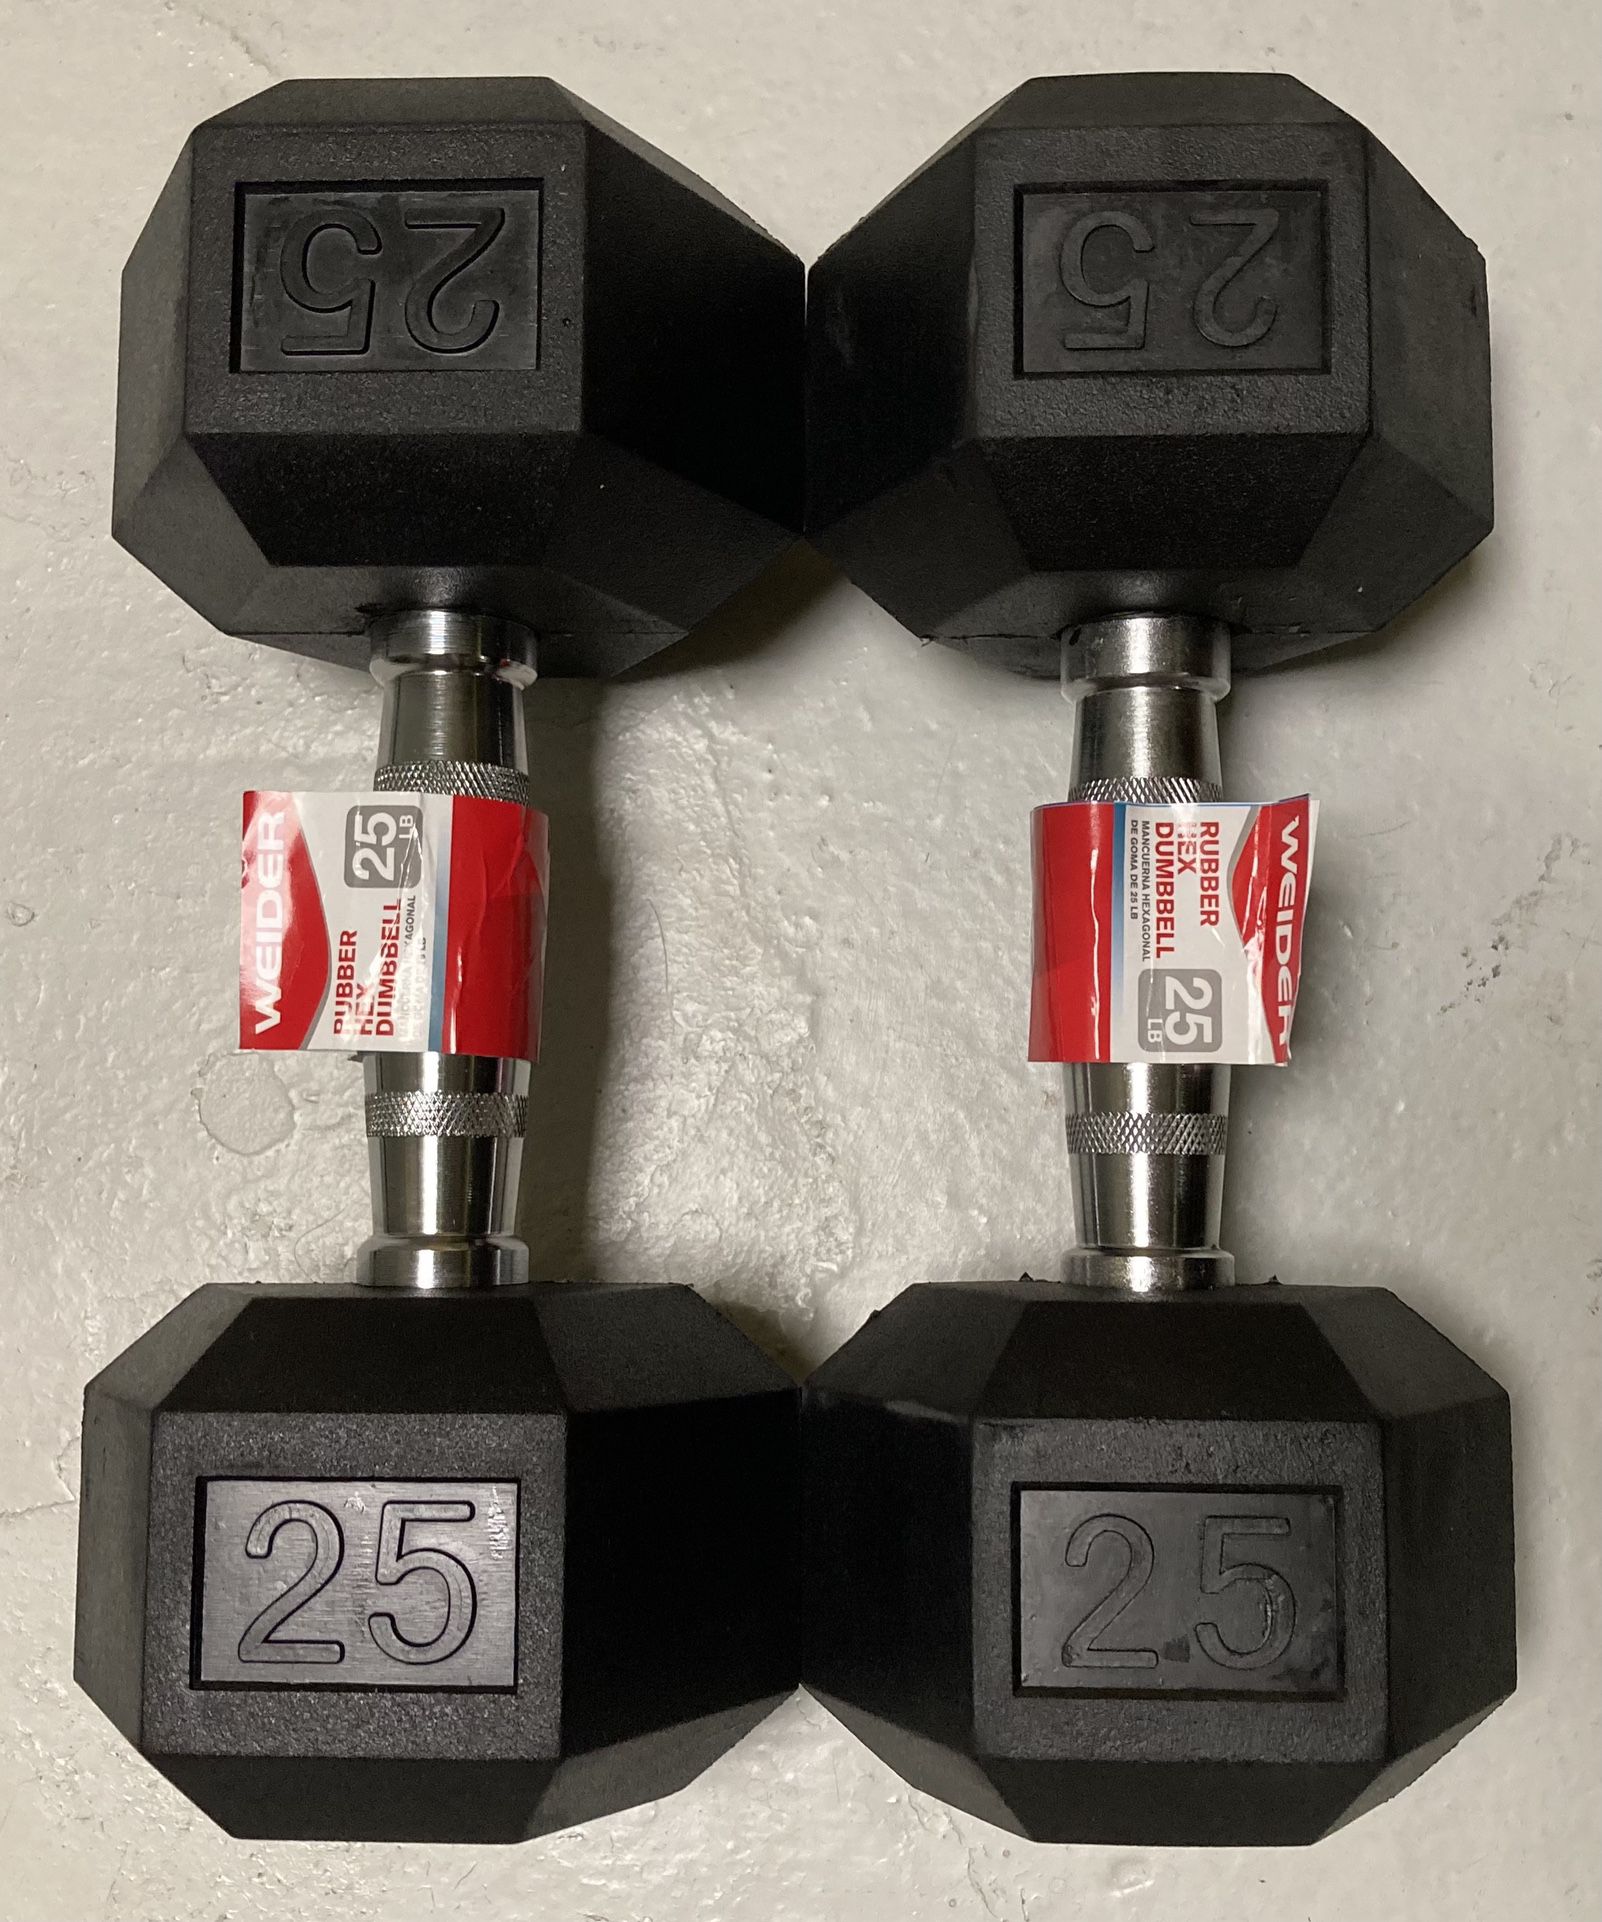 25 lb dumbbells dumbbell set x2 50 lbs total Rubber Hex weights weight pair pounds pound 25lb 25lbs 50lb 50lbs # NEW